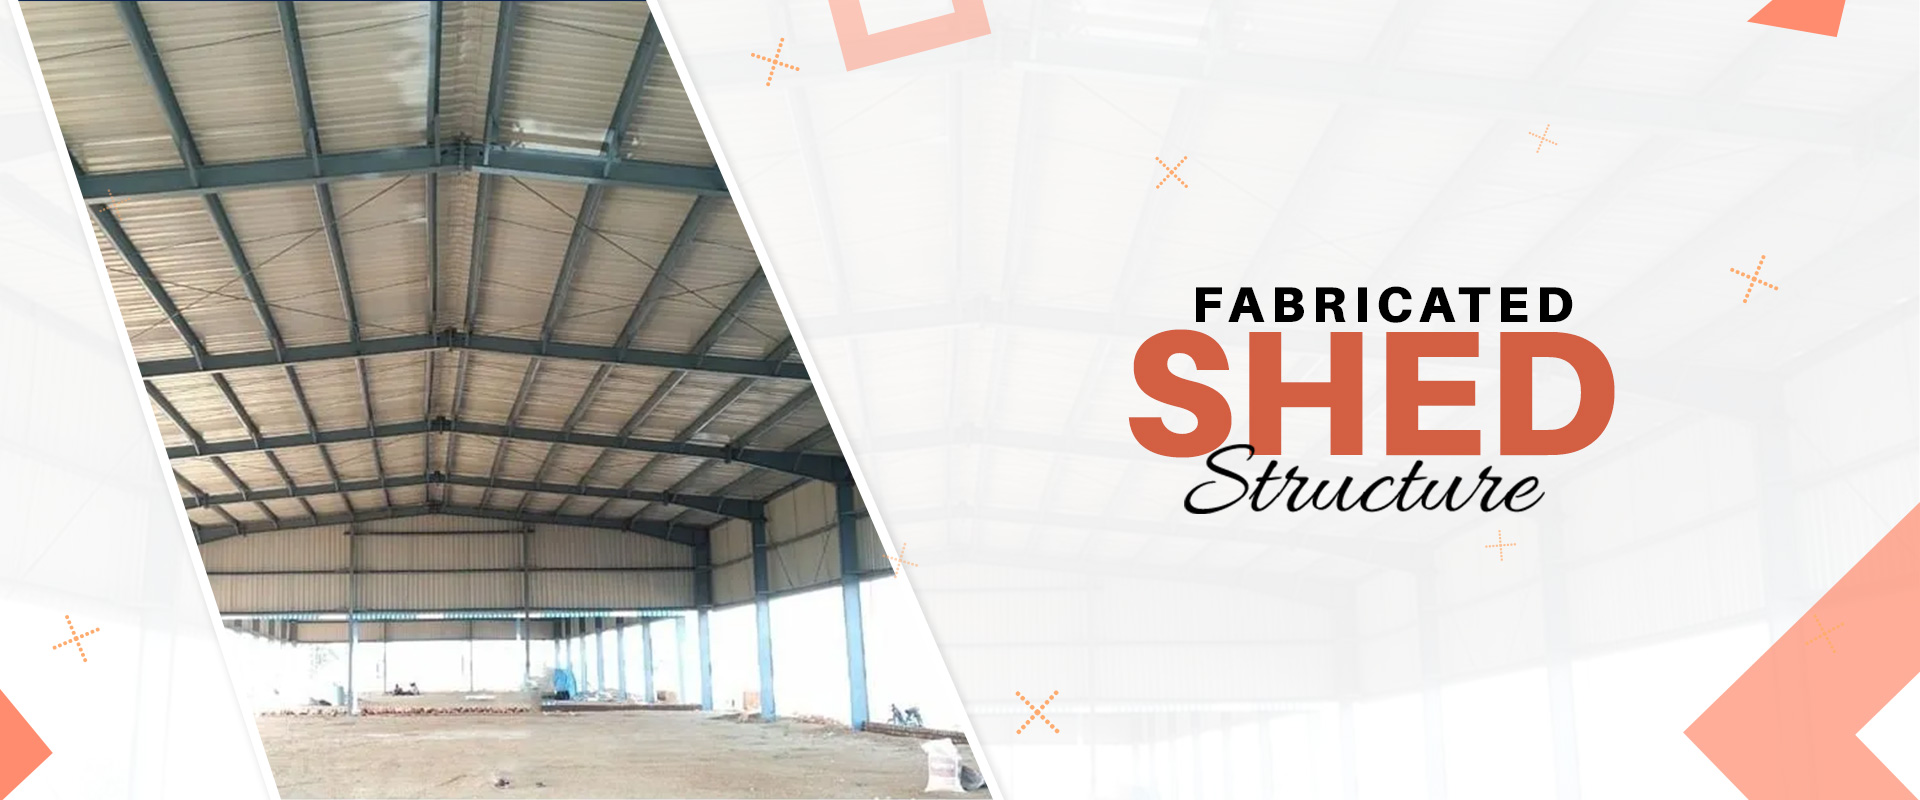 Fabricated Shed Structure